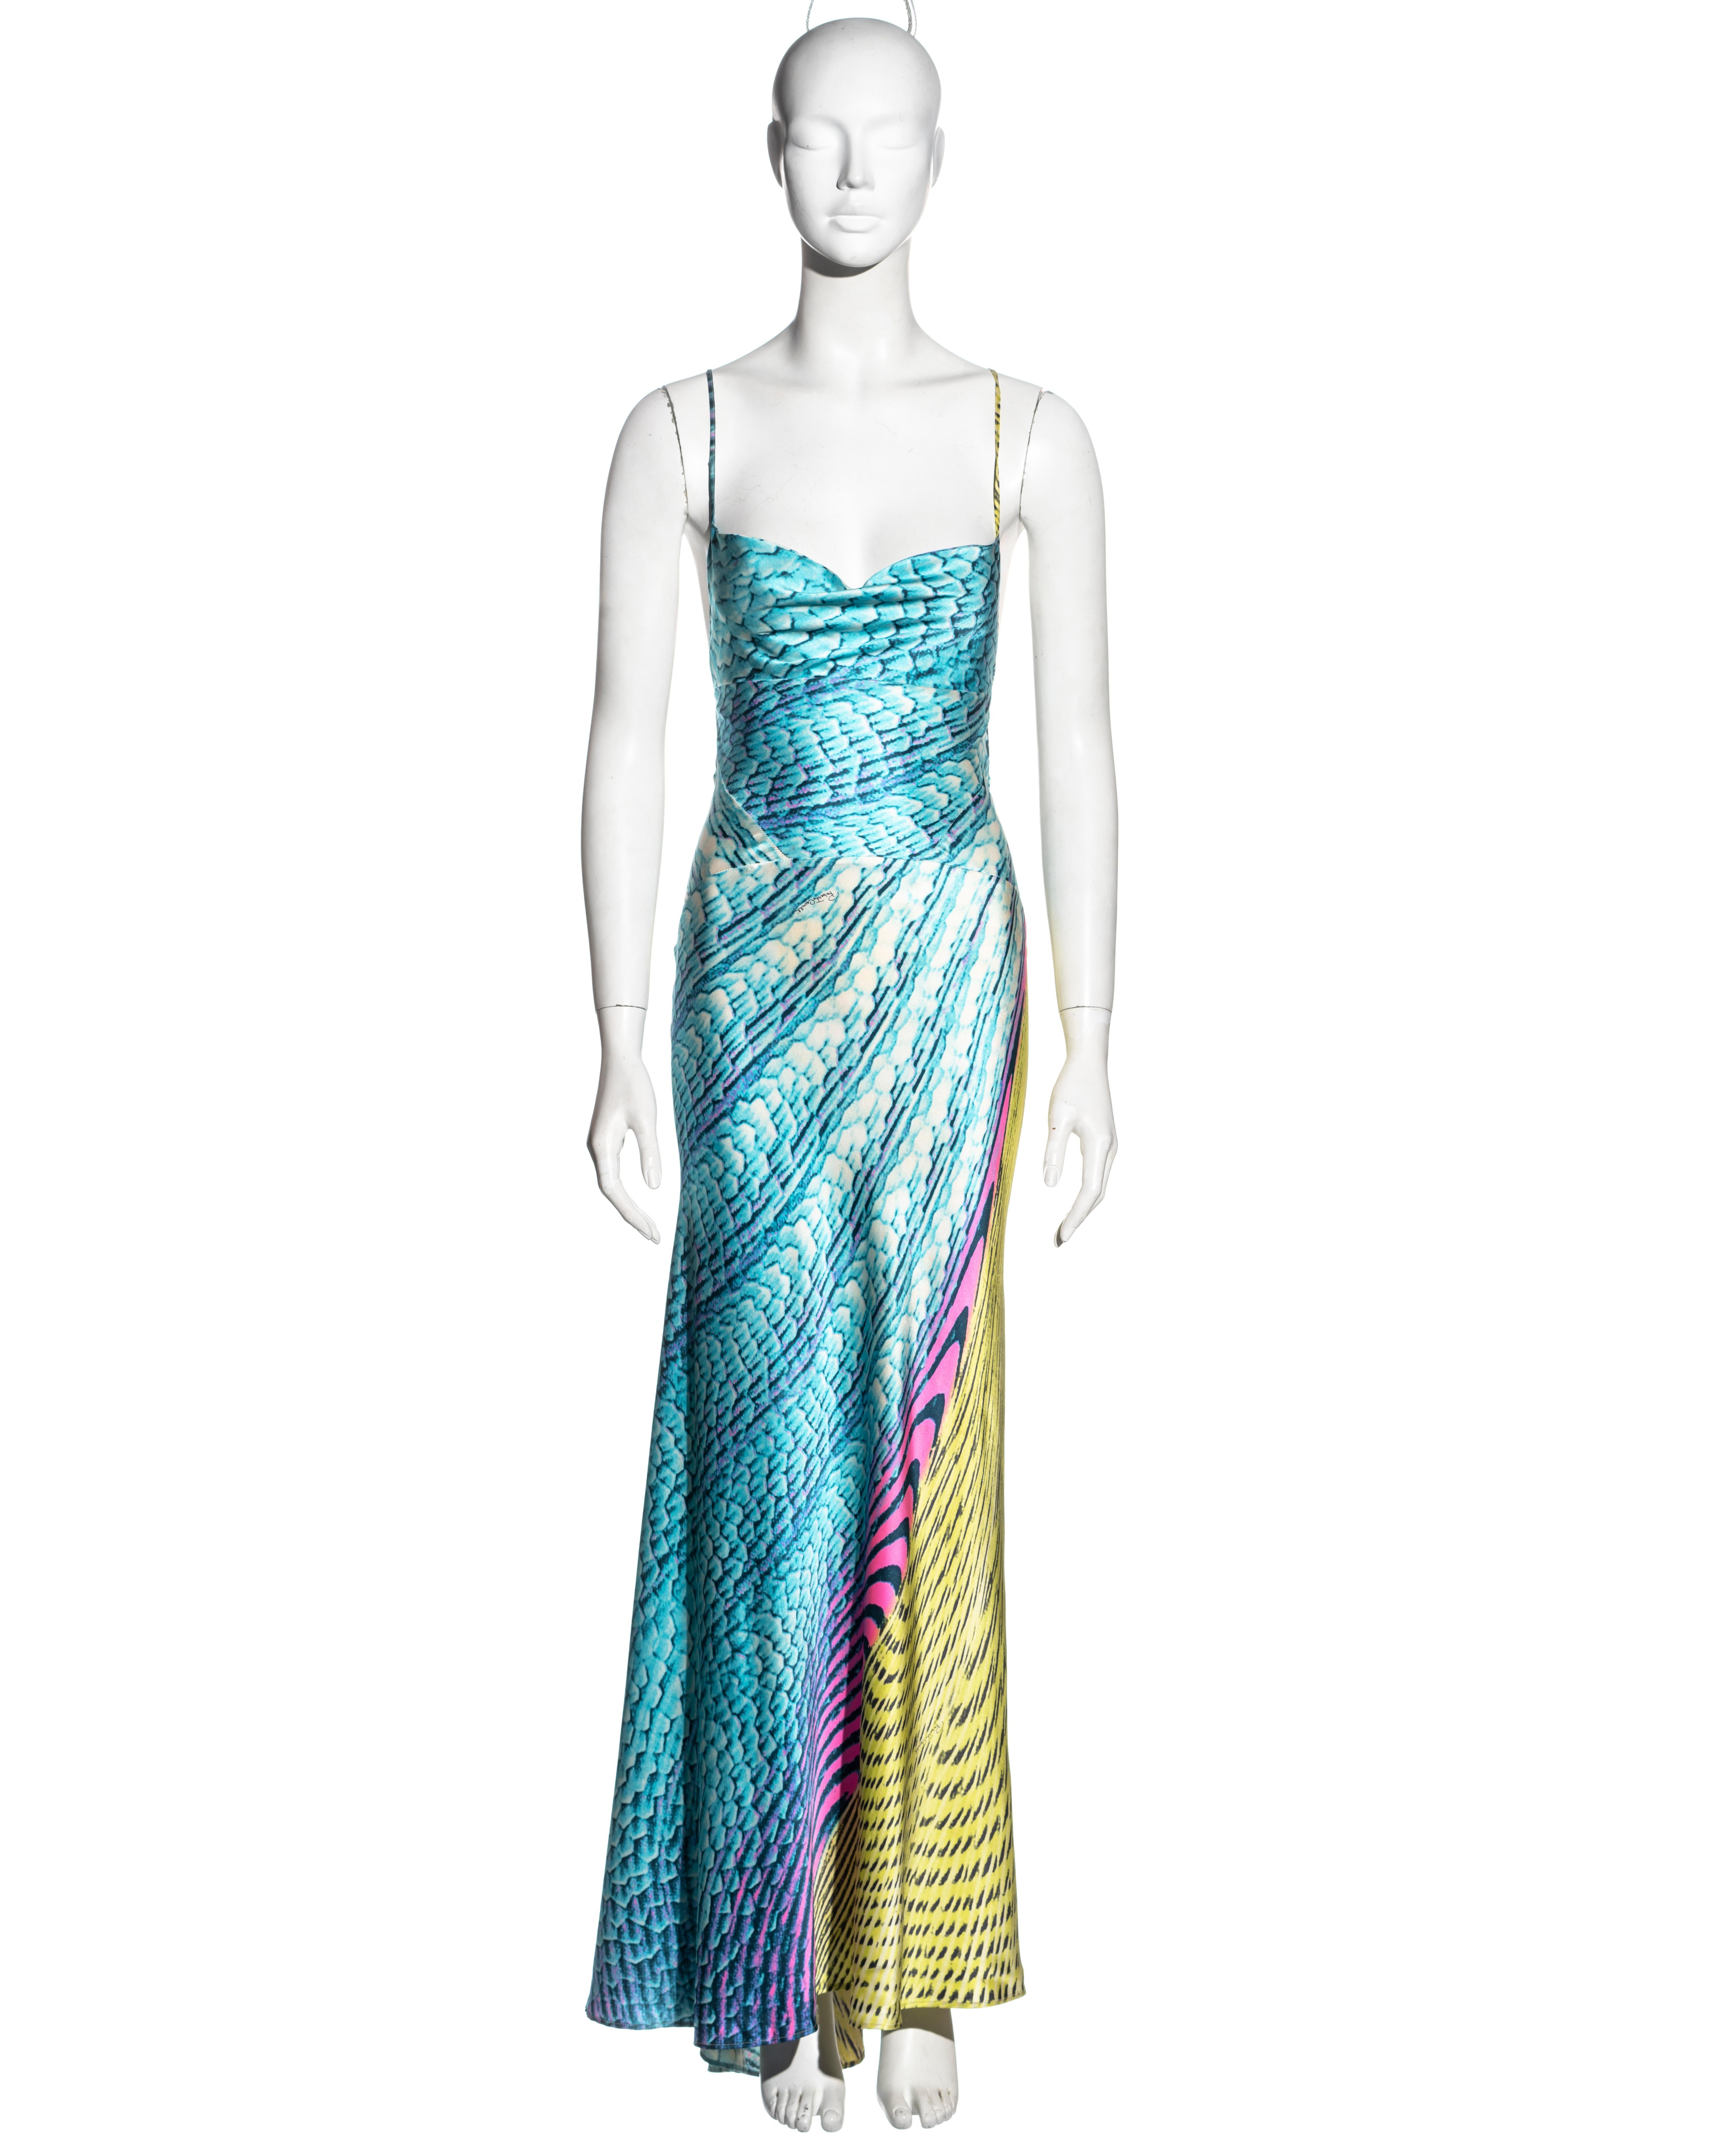 ▪ Roberto Cavalli silk evening dress
▪ Psychedelic print in vibrant blue, pink and chartreuse
▪ Bias cut 
▪ Cowl neck 
▪ Open low back 
▪ Asymmetric hemline 
▪ Size Extra Small
▪ Spring-Summer 2001
▪ 100% Silk
▪ Made in Italy